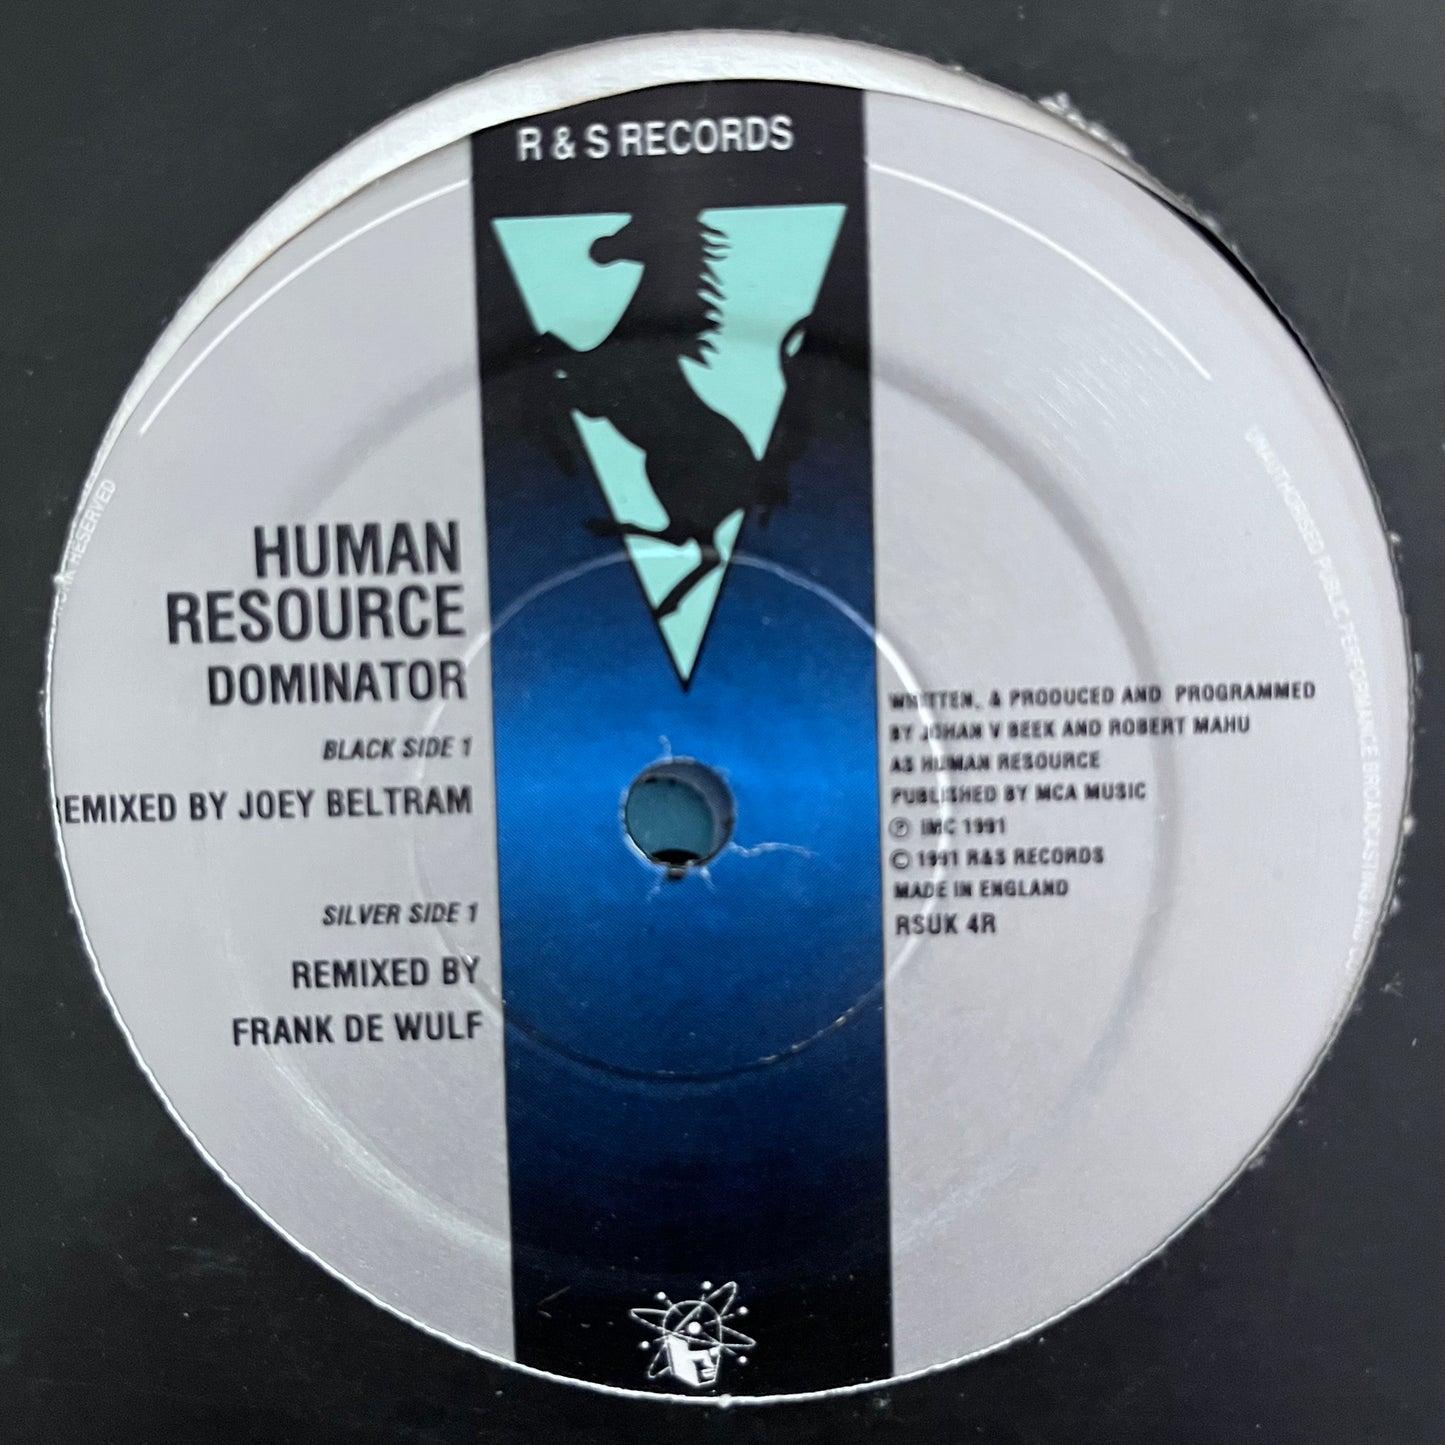 Human Resource “Dominator” Remixes 2 Track 12inch Vinyl on R&S Records